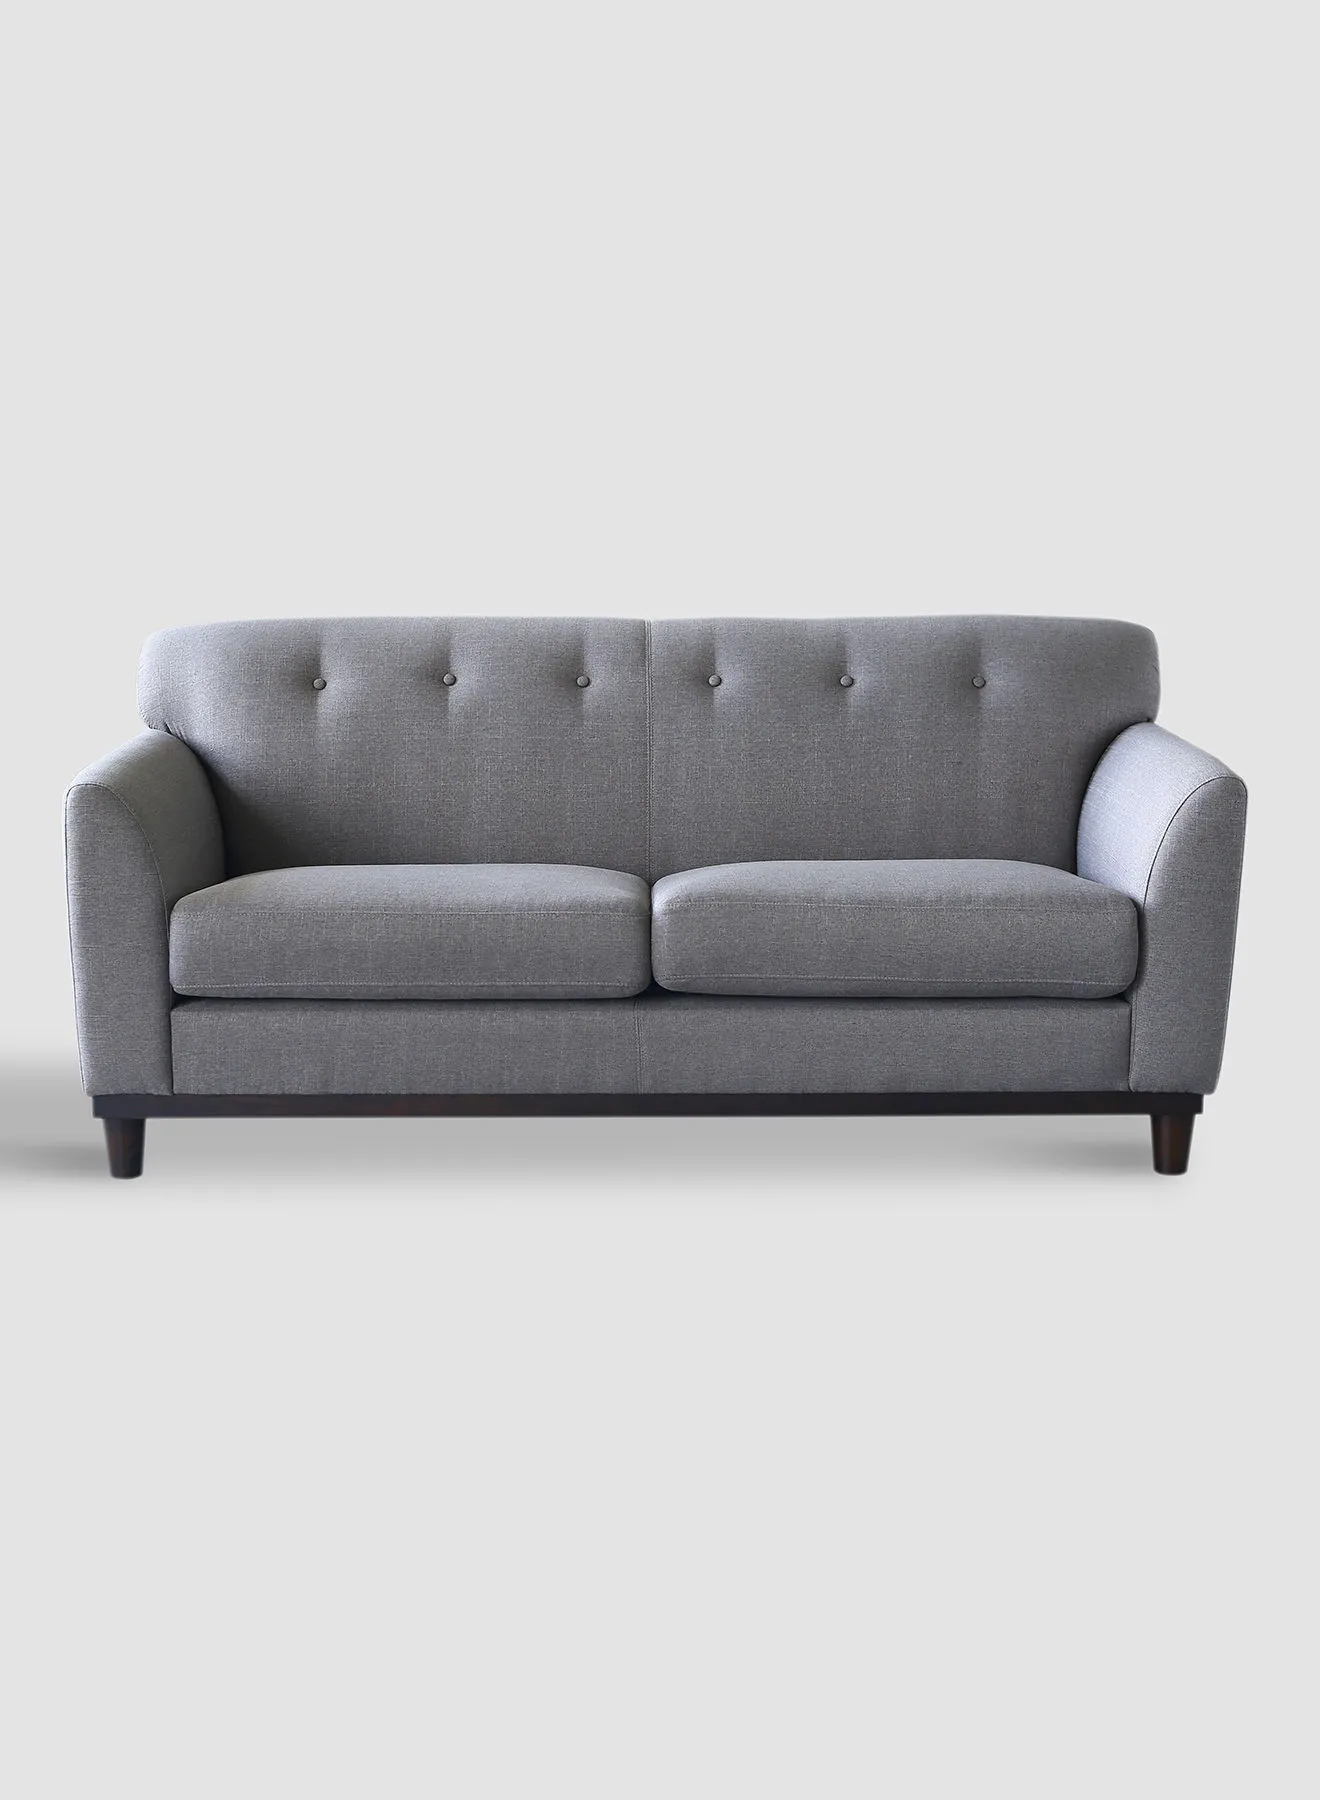 Switch Sofa - Upholstered Fabric Grey Wood Couch - 1880 X 940 X 790 - 2 Seater Sofa Relaxing Sofa